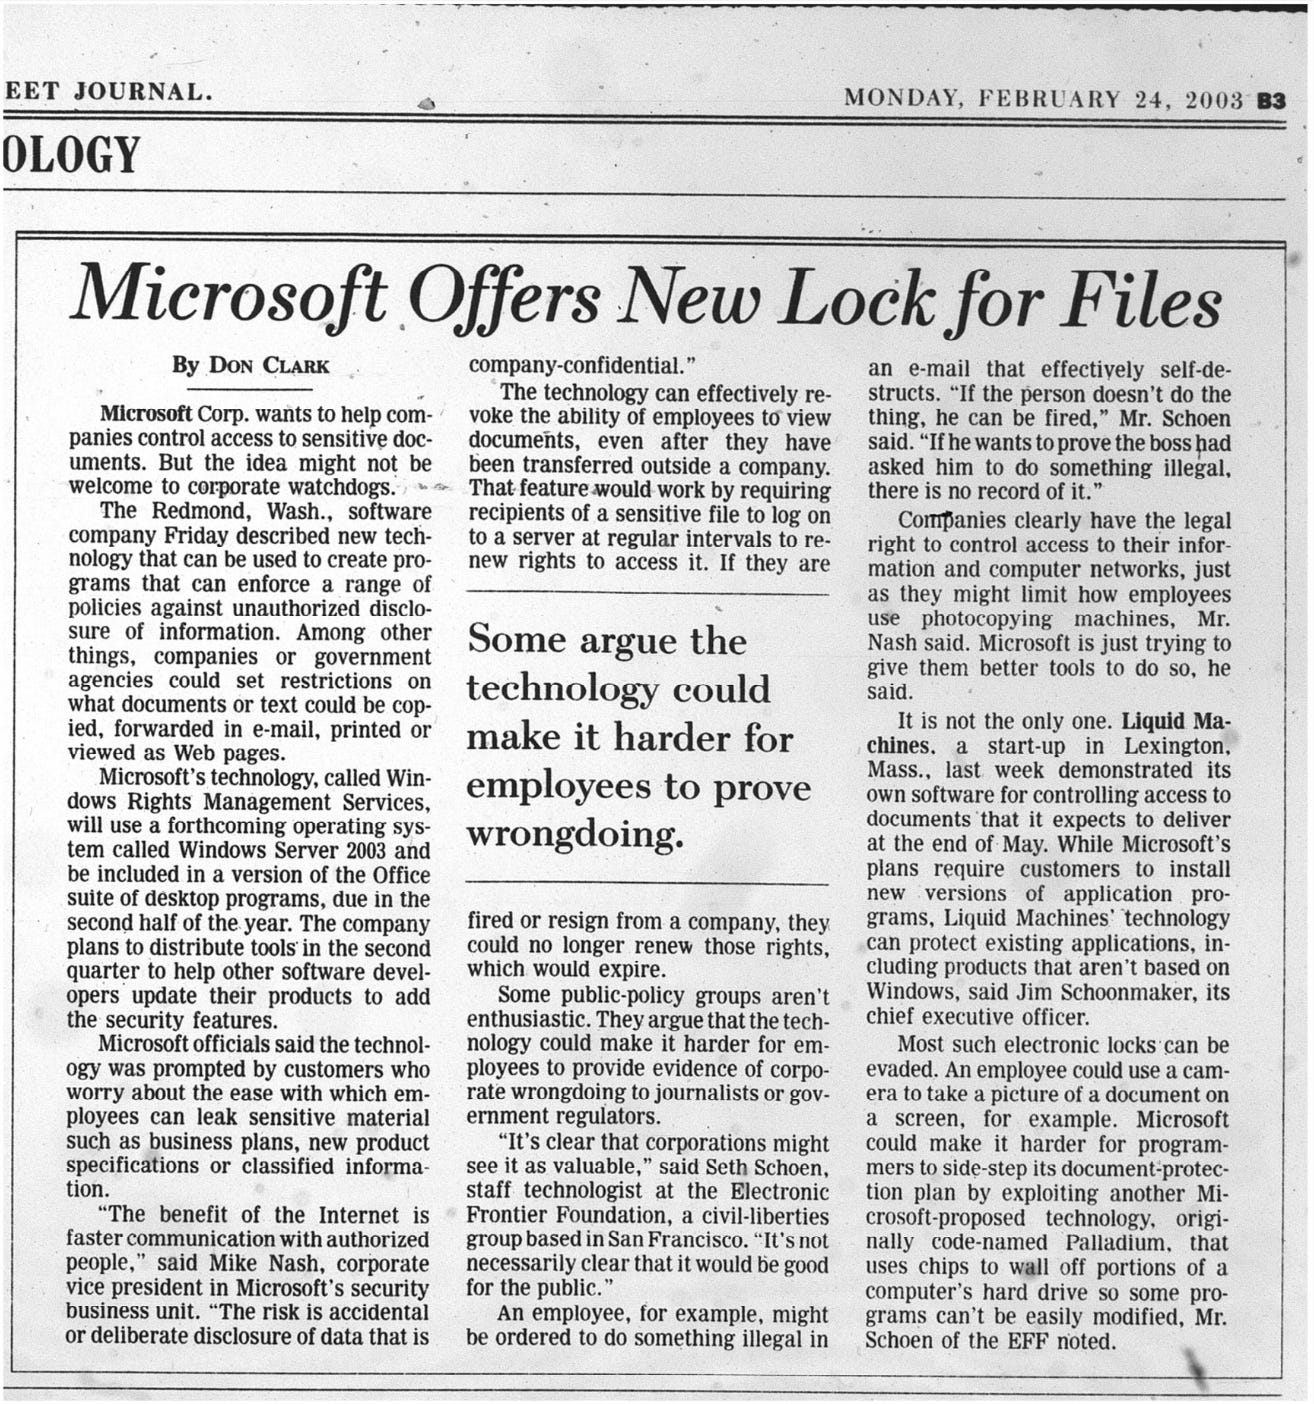 Microsoft Offers New Lock for Files By DoN CLARK company-confidential." an e-mail that effectively self-de- The technology can effectively re- structs. "If the person doesn't do the Microsoft Corp. wants to help com- panies control access to sensitive doc- uments. But the idea might not be welcome to corporate watchdogs. The Redmond, Wash., software company Friday described new tech- nology that can be used to create pro- grams that can enforce a range of policies against unauthorized disclo- sure of information. Among other things, companies or government agencies could set restrictions on what documents or text could be cop- ied, forwarded in e-mail, printed or viewed as Web pages. Microsoft's technology, called Win- dows Rights Management Services, will use a forthcoming operating sys- tem called Windows Server 2003 and be included in a version of the Office suite of desktop programs, due in the second half of the year. The company plans to distribute tools in the second quarter to help other software devel- opers update their products to add the security features. Microsoft officials said the technol- ogy was prompted by customers who worry about the ease with which em ployees can leak sensitive material such as business plans, new product specifications or classified informa- tion. "The benefit of the Internet is faster communication with authorized people, " said Mike Nash, corporate vice president in Microsoft's security business unit. "The risk is accidental or deliberate disclosure of data that is voke the ability of employees to view thing, he can be fired," Mr. Schoen documents, even after they have said. "If he wants to prove the boss had been transferred outside a company. asked him to do something illegal, That feature would work by requiring there is no record of it. recipients of a sensitive file to log on Companies clearly have the legal to a server at regular intervals to re- right to control access to their infor- new rights to access it. If they are mation and computer networks, just as they might limit how employees use photocopying machines, Mr. Some argue the technology could make it harder for Nash said. Microsoft is just trying to give them better tools to do so, he said. It is not the only one. Liquid Ma- chines. a start-up in Lexington, employees to prove wrongdoing. Mass., last week demonstrated its own software for controlling access to documents that it expects to deliver at the end of May. While Microsoft's plans require customers to install new versions of application pro fired or resign from a company, they could no longer renew those rights, which would expire. Some public-policy groups aren't enthusiastic. They argue that the tech- nology could make it harder for em ployees to provide evidence of corpo- rate wrongdoing to journalists or gov- ernment regulators. "It's clear that corporations might see it as valuable," said Seth Schoen, staff technologist at the Electronic Frontier Foundation, a civil-liberties group based in San Francisco. "It's not necessarily clear that it would be good for the public. An employee, for example, might be ordered to do something illegal in grams, Liquid Machines' technology can protect existing applications, in- cluding products that aren't based on Windows, said Jim Schoonmaker, its chief executive officer. Most such electronic locks can be evaded. An employee could use a cam- era to take a picture of a document on a screen, for example. Microsoft could make it harder for program- mers to side-step its document protec- tion plan by exploiting another Mi- crosoft-proposed technology, origi- nally code-named Palladium, that uses chips to wall off portions of a computer's hard drive so some pro- grams can't be easily modified, Mr. Schoen of the EFF noted.